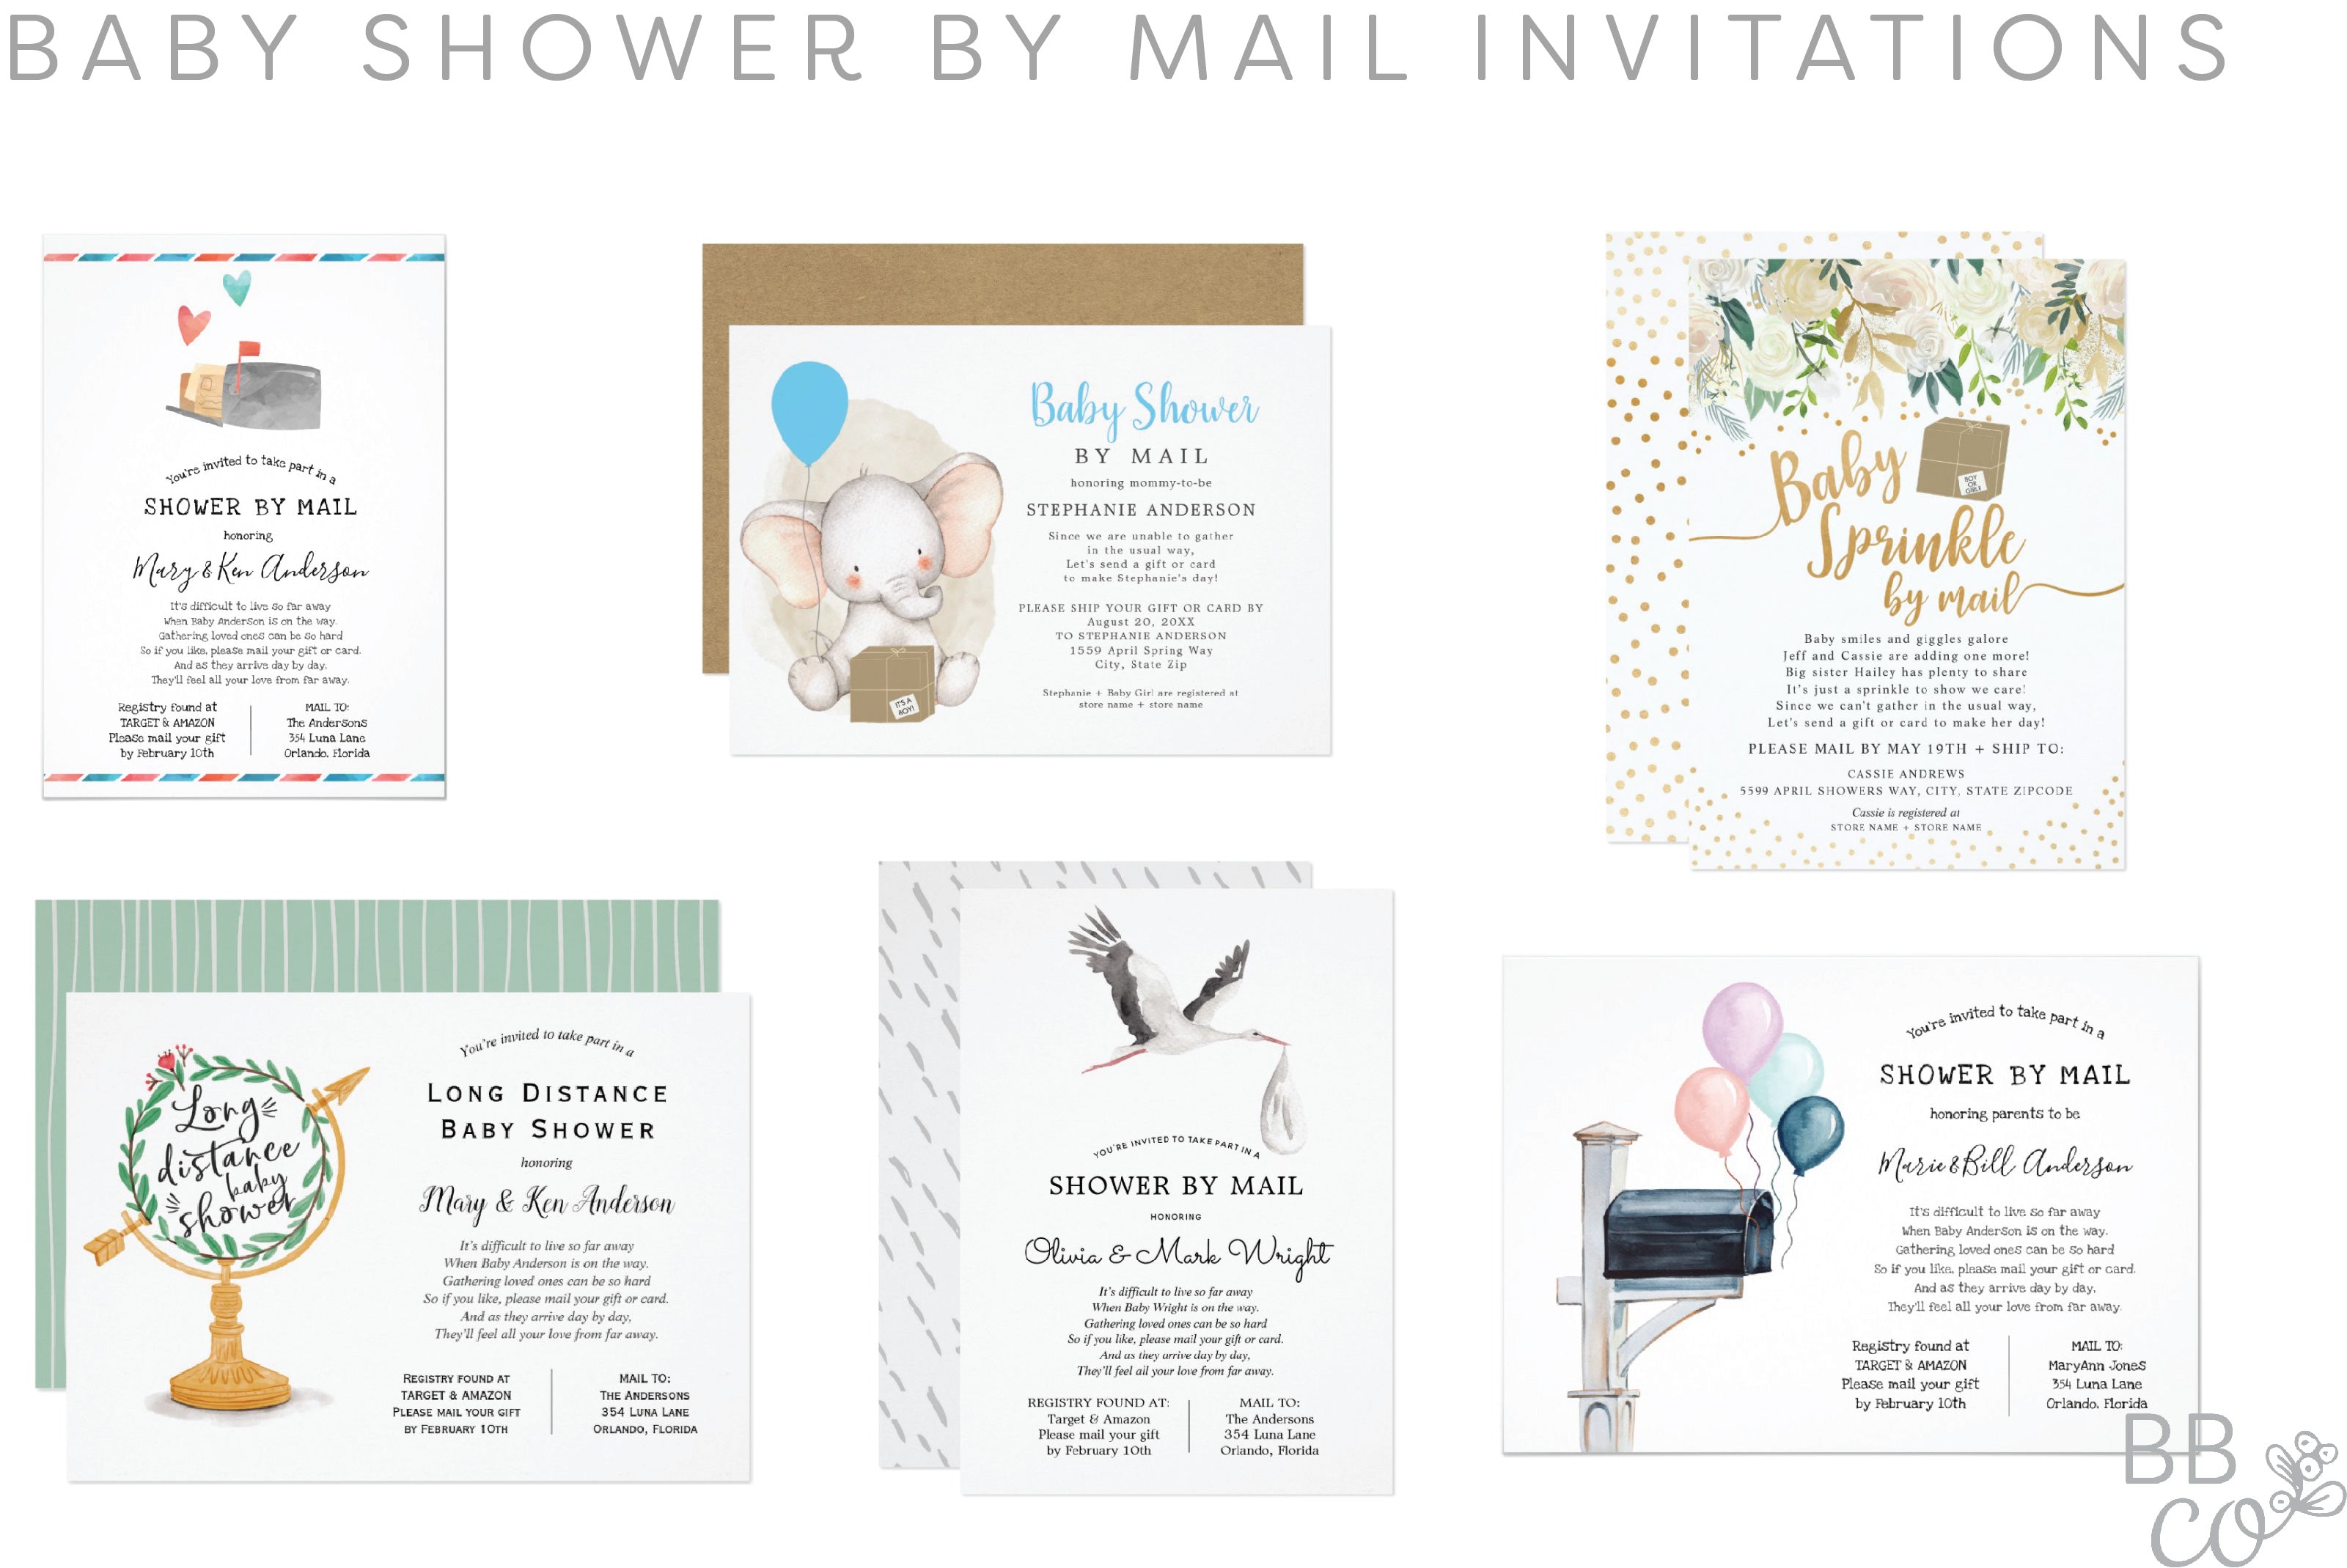 Long Distance baby shower invitations